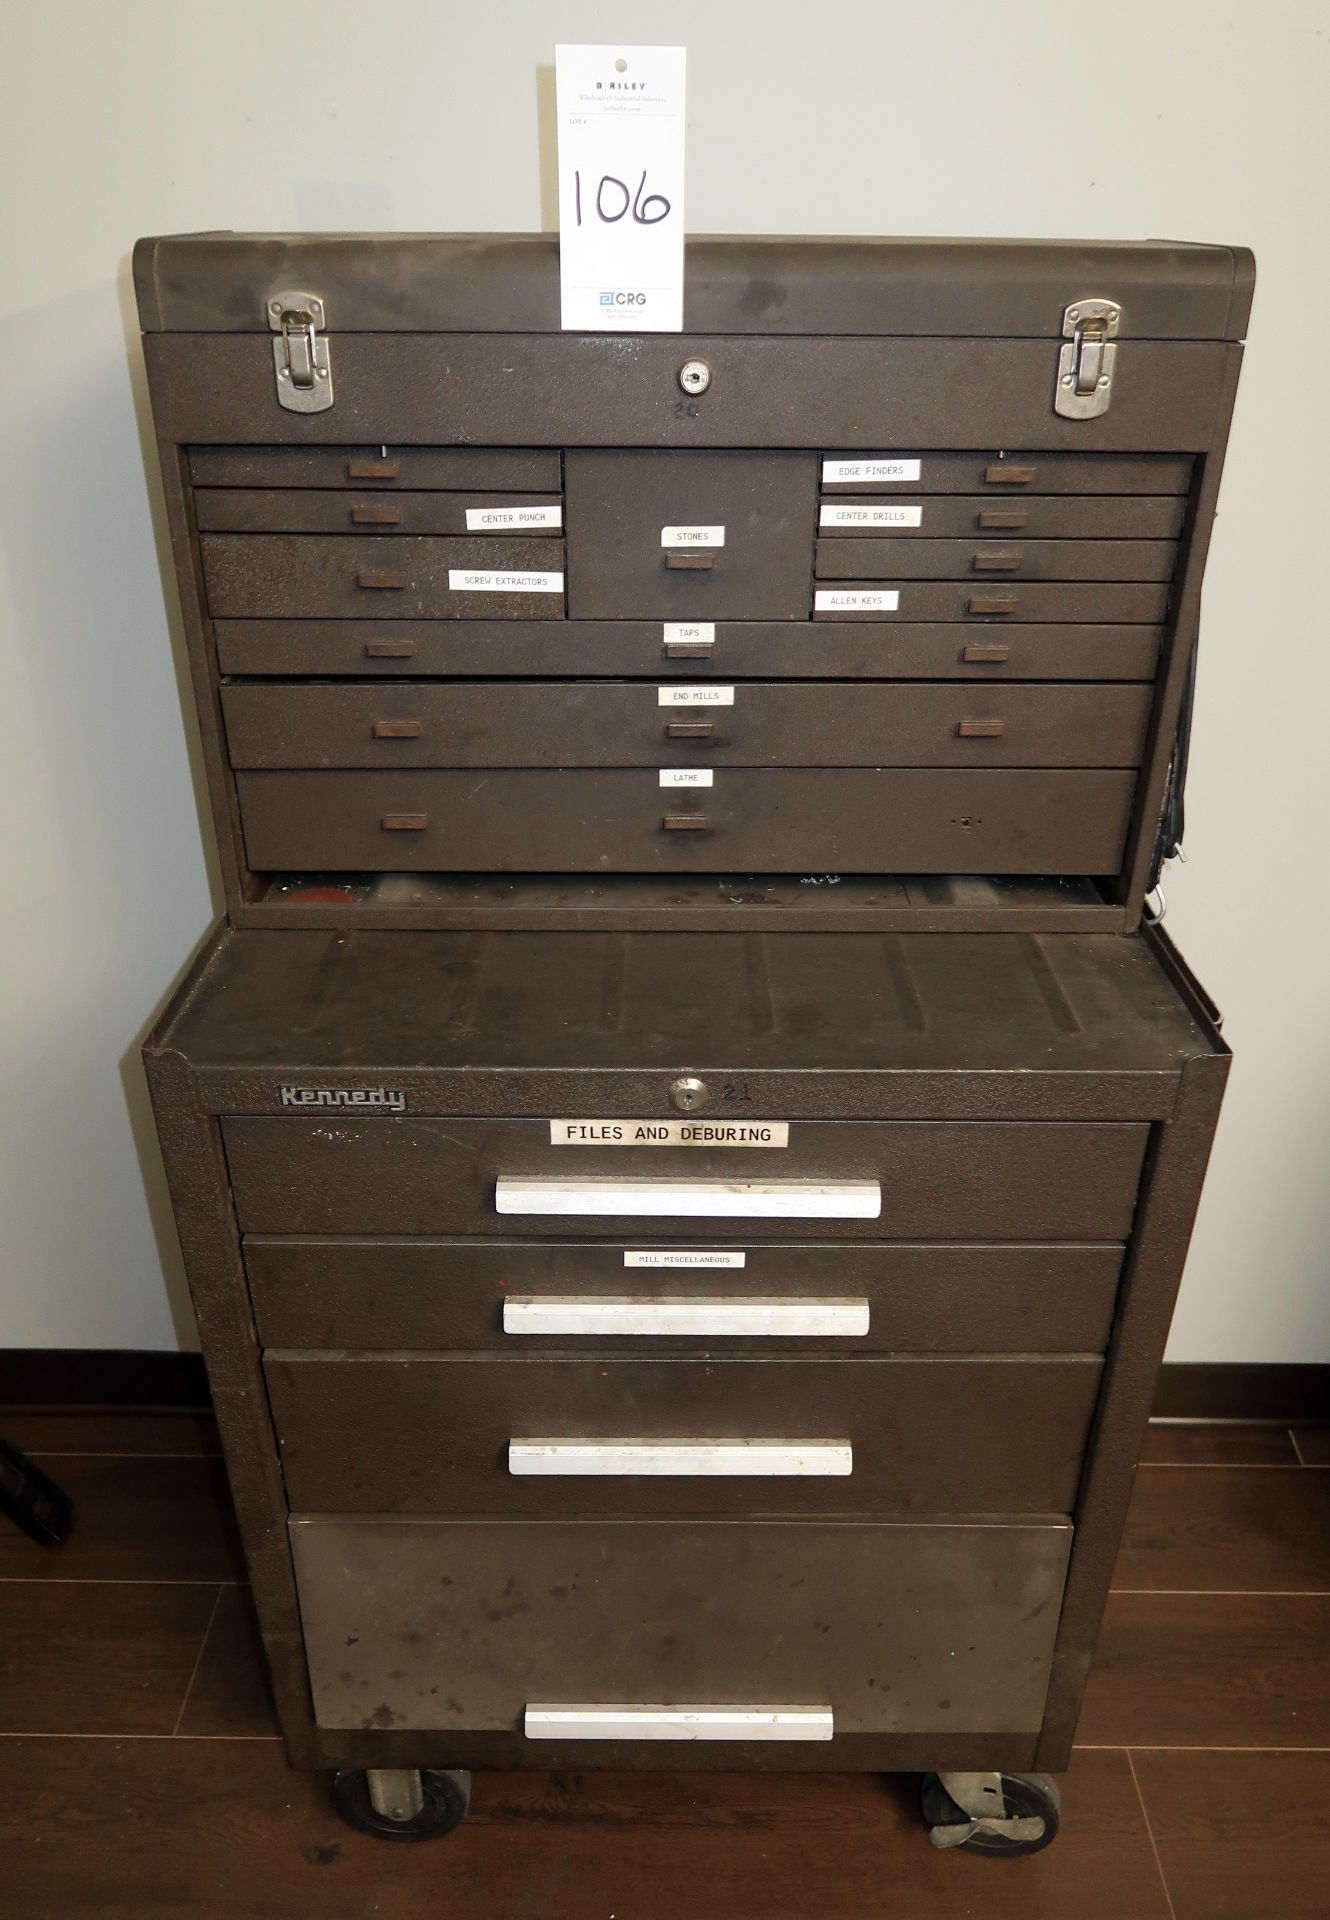 Rolling Kennedy tool chest and contents